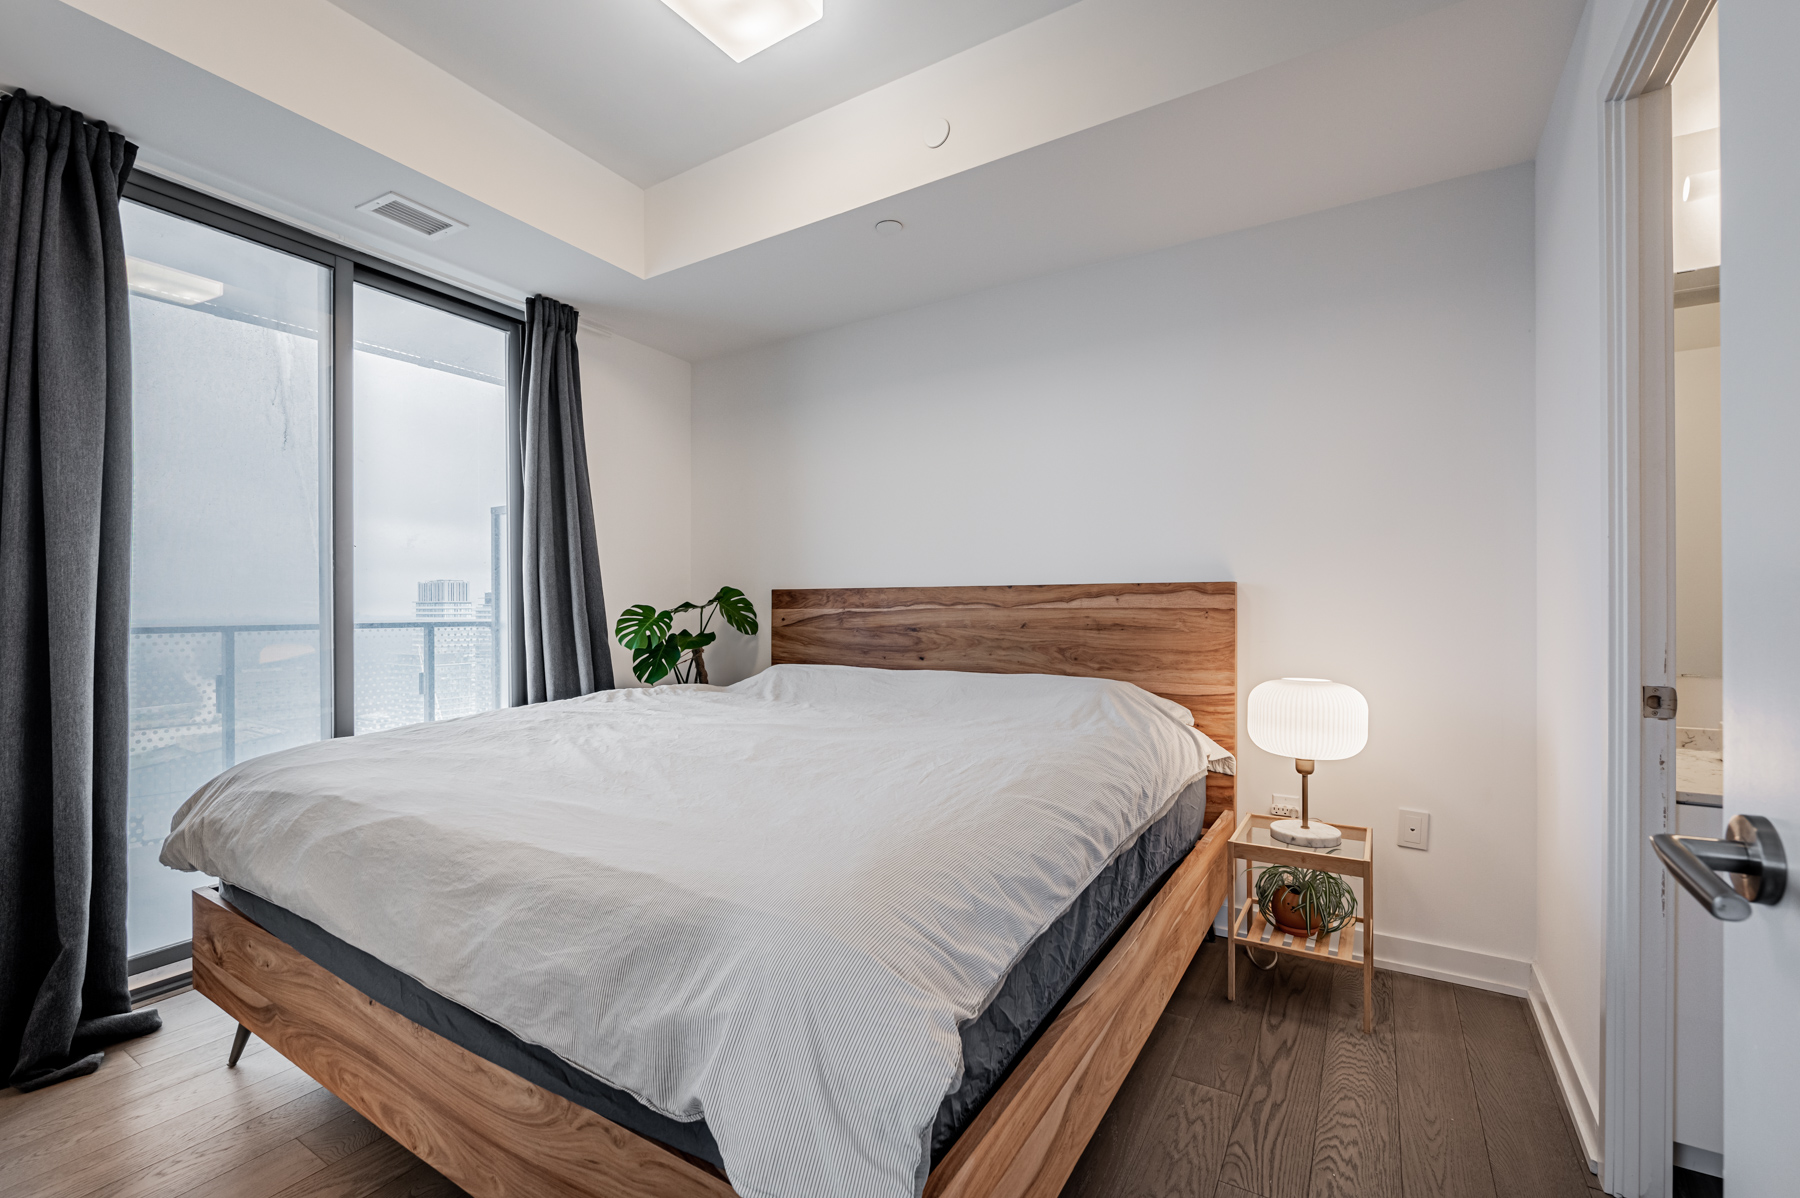 Primary condo bedroom with large bed and balcony access – 11 Wellesley St Suite 5808.